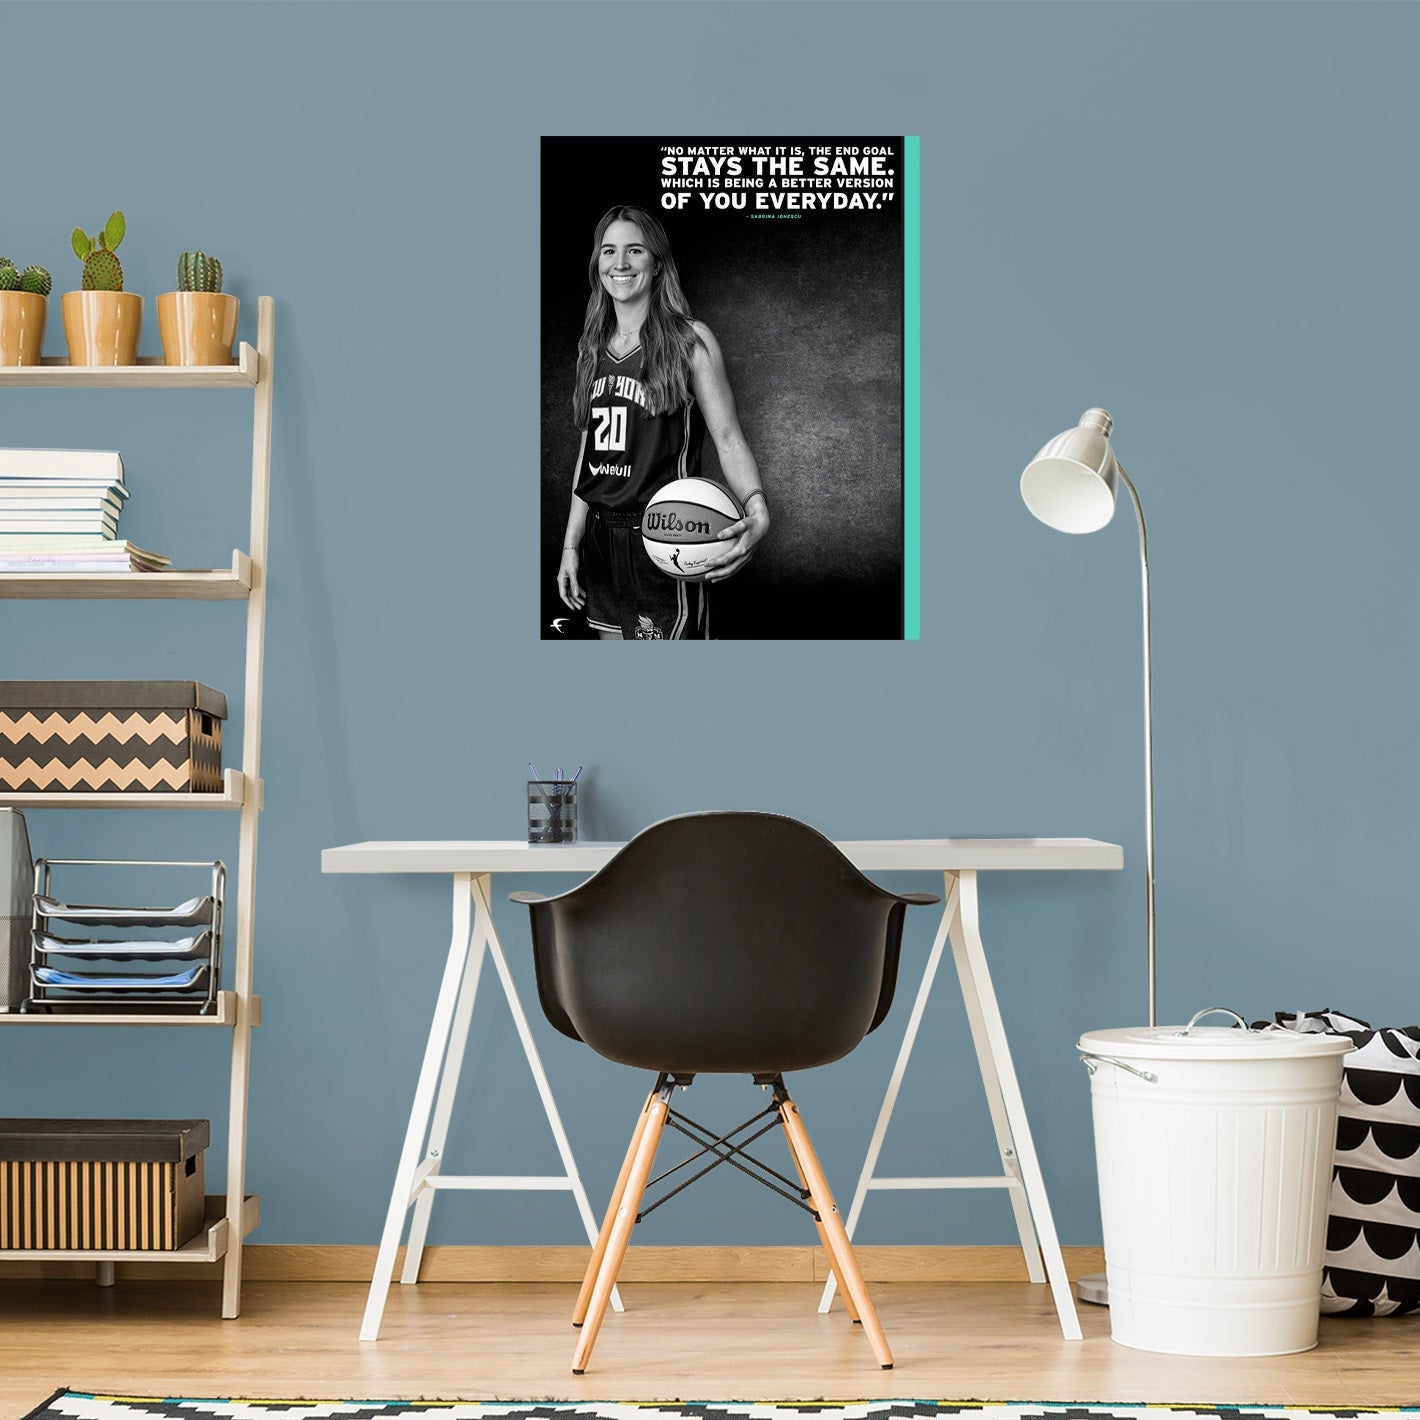 New York Liberty: Sabrina Ionescu Inspirational Poster - Officially Licensed WNBA Removable Adhesive Decal